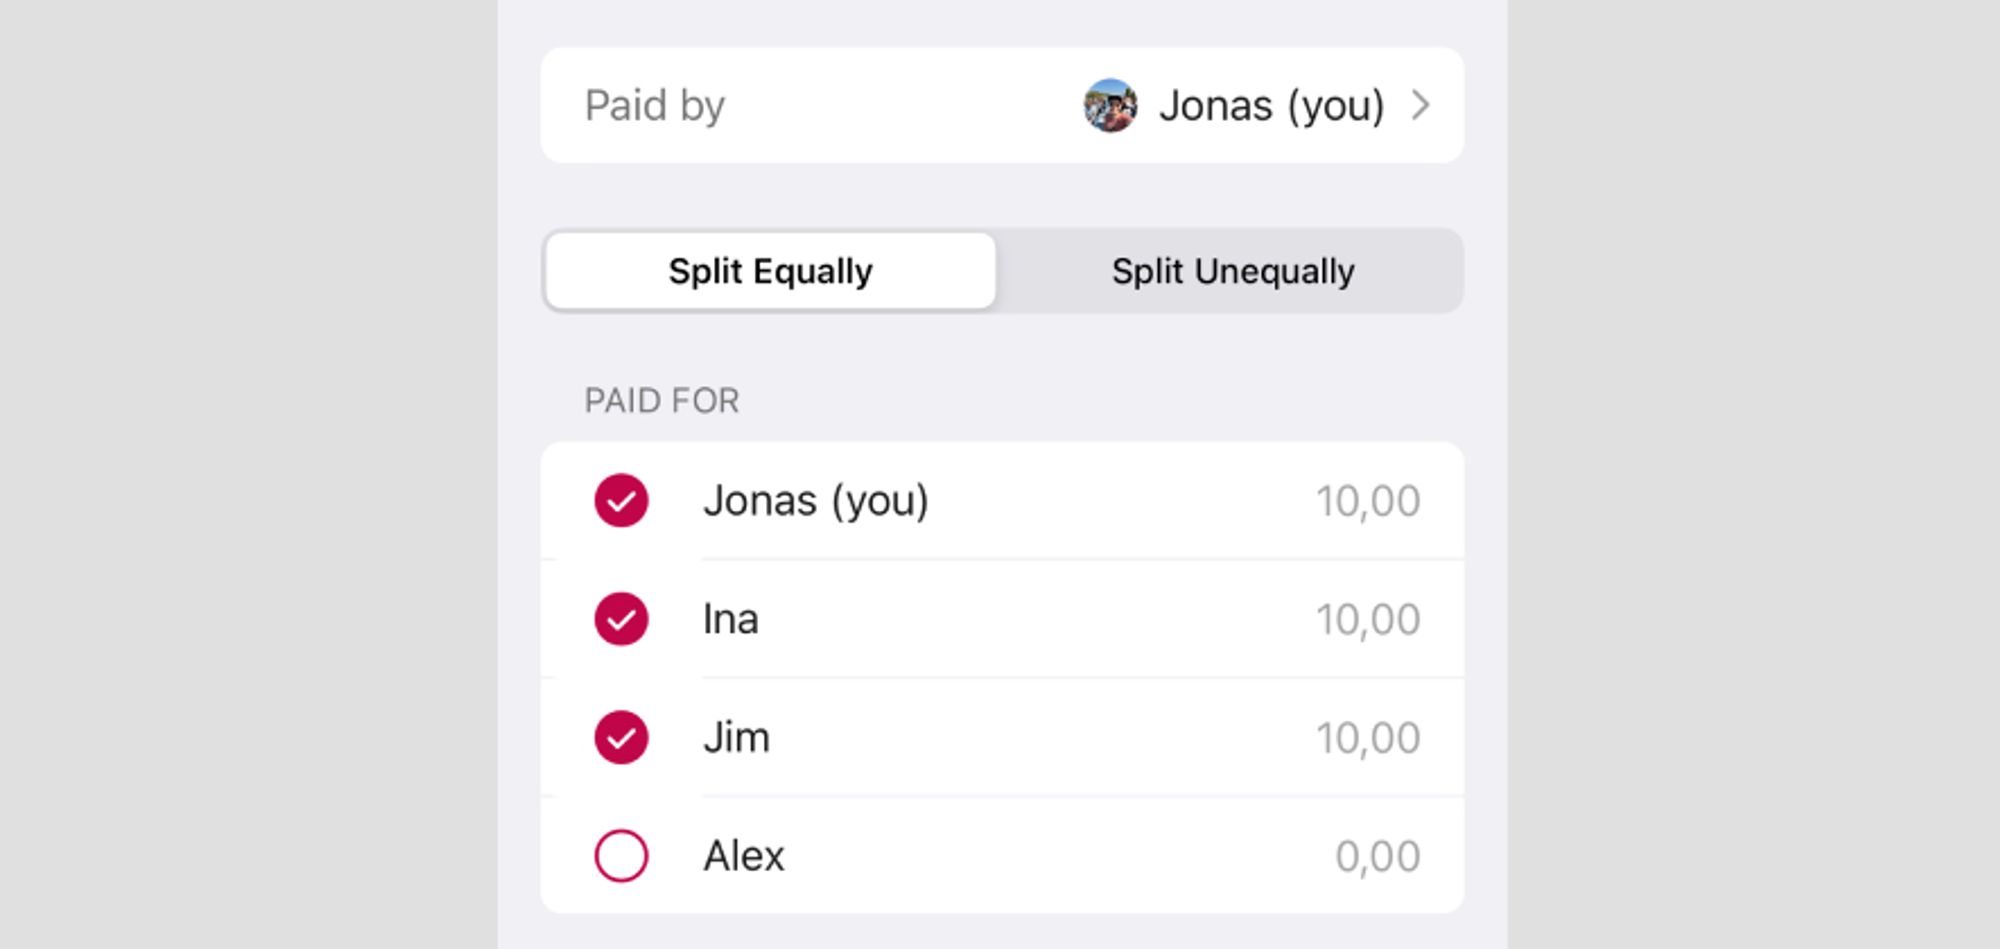 In this example Jonas paid for the expense and it was made for Jonas, Ina and Jim.